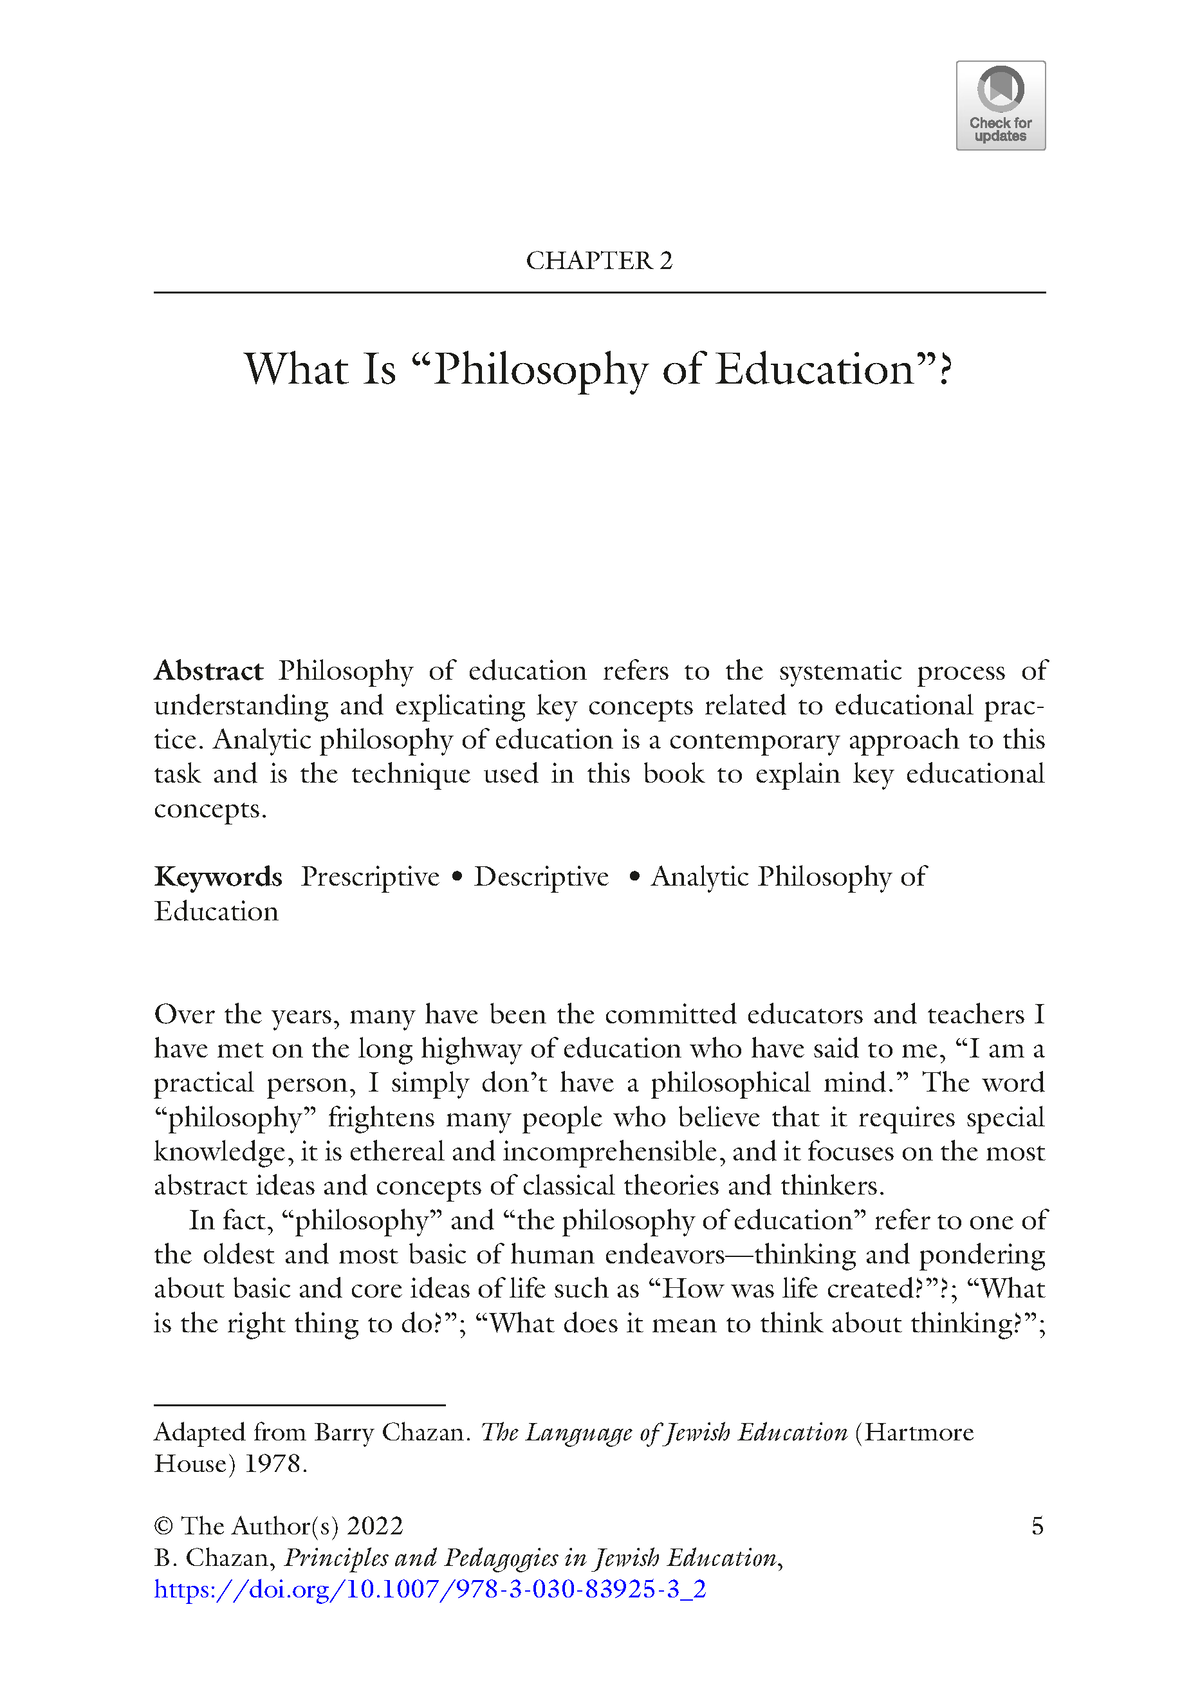 sample term paper about philosophy of education